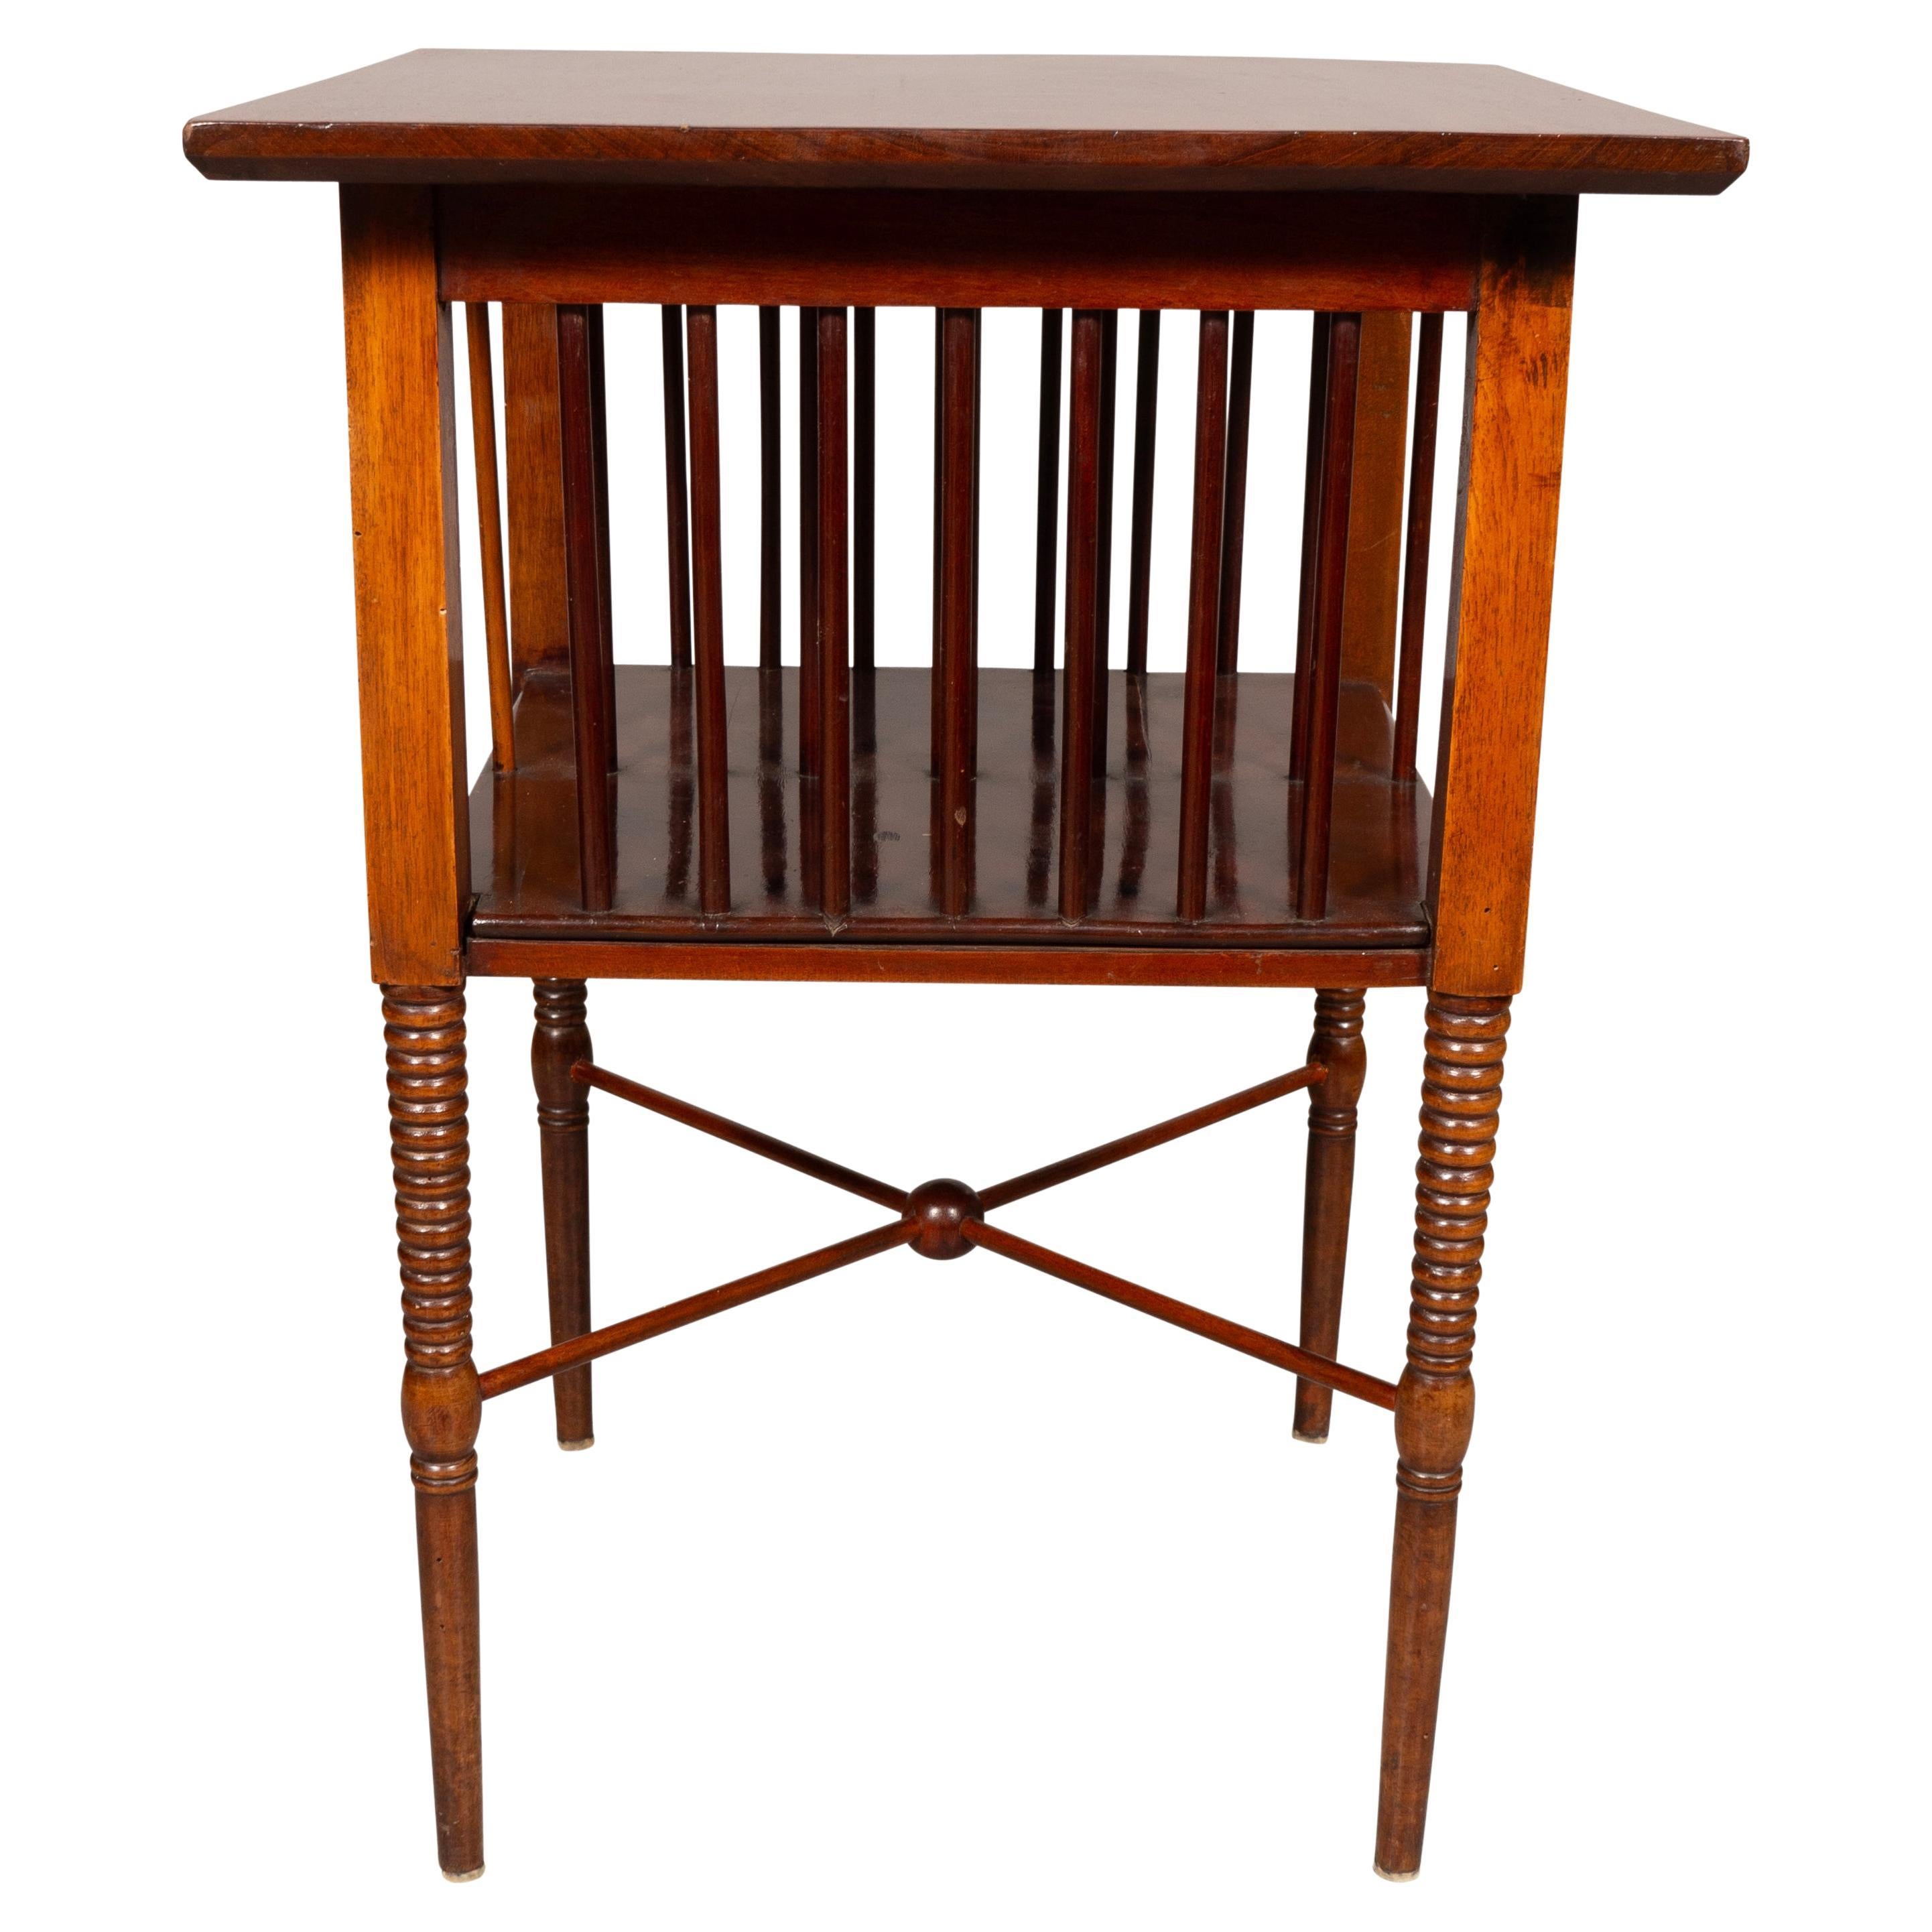 Square solid mahogany top over spindle sides supporting a conforming shelf. Circular ring turned legs joined by an X form stretcher with central ball turning.